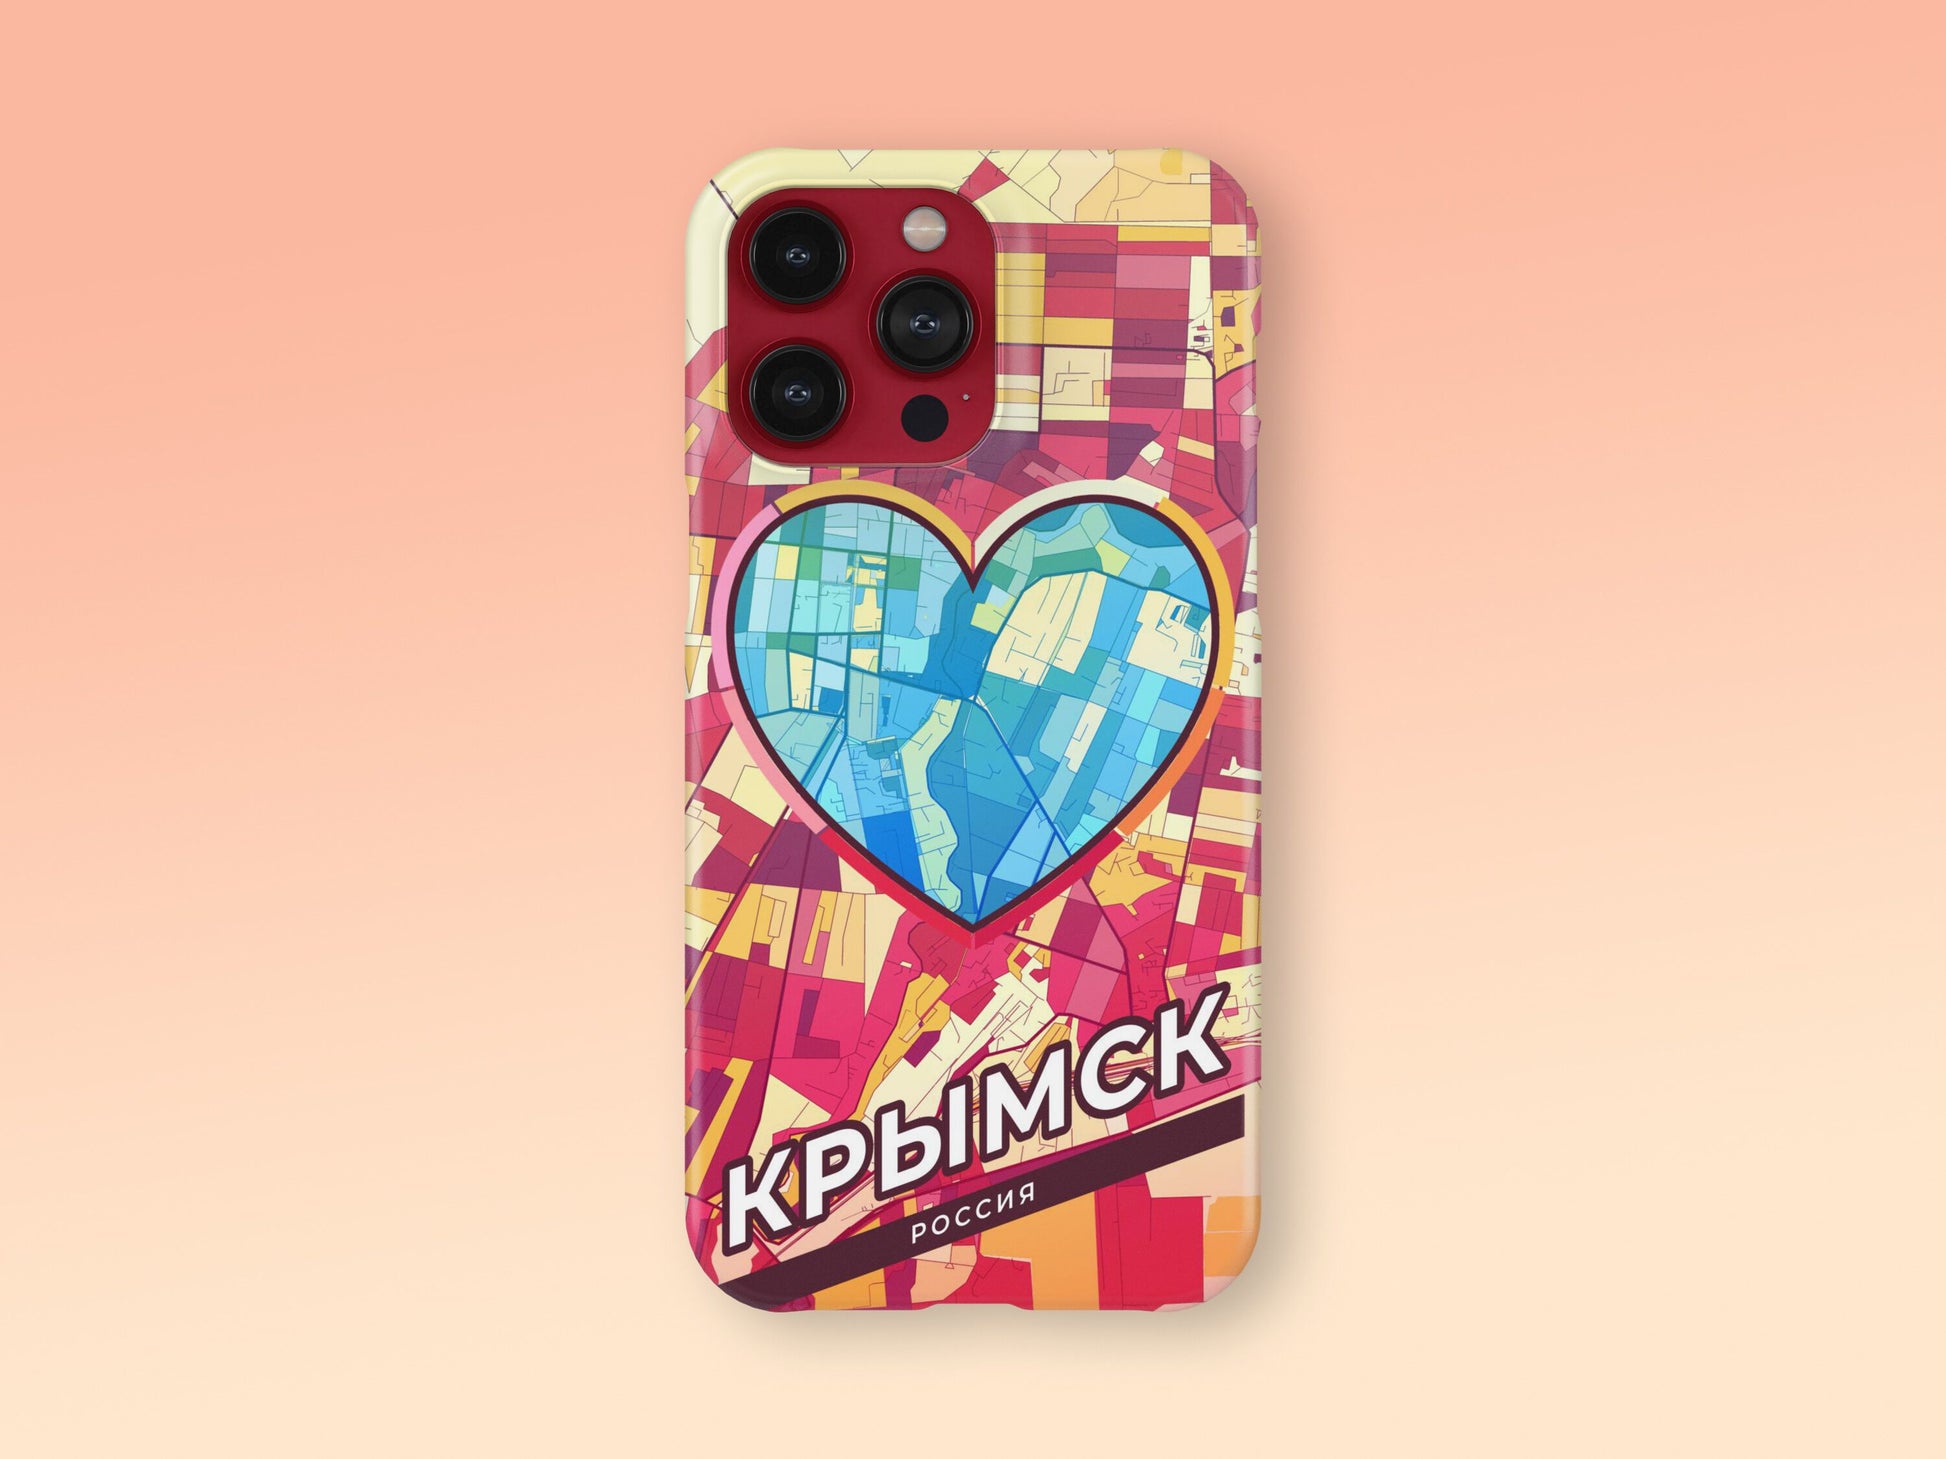 Krymsk Russia slim phone case with colorful icon. Birthday, wedding or housewarming gift. Couple match cases. 2